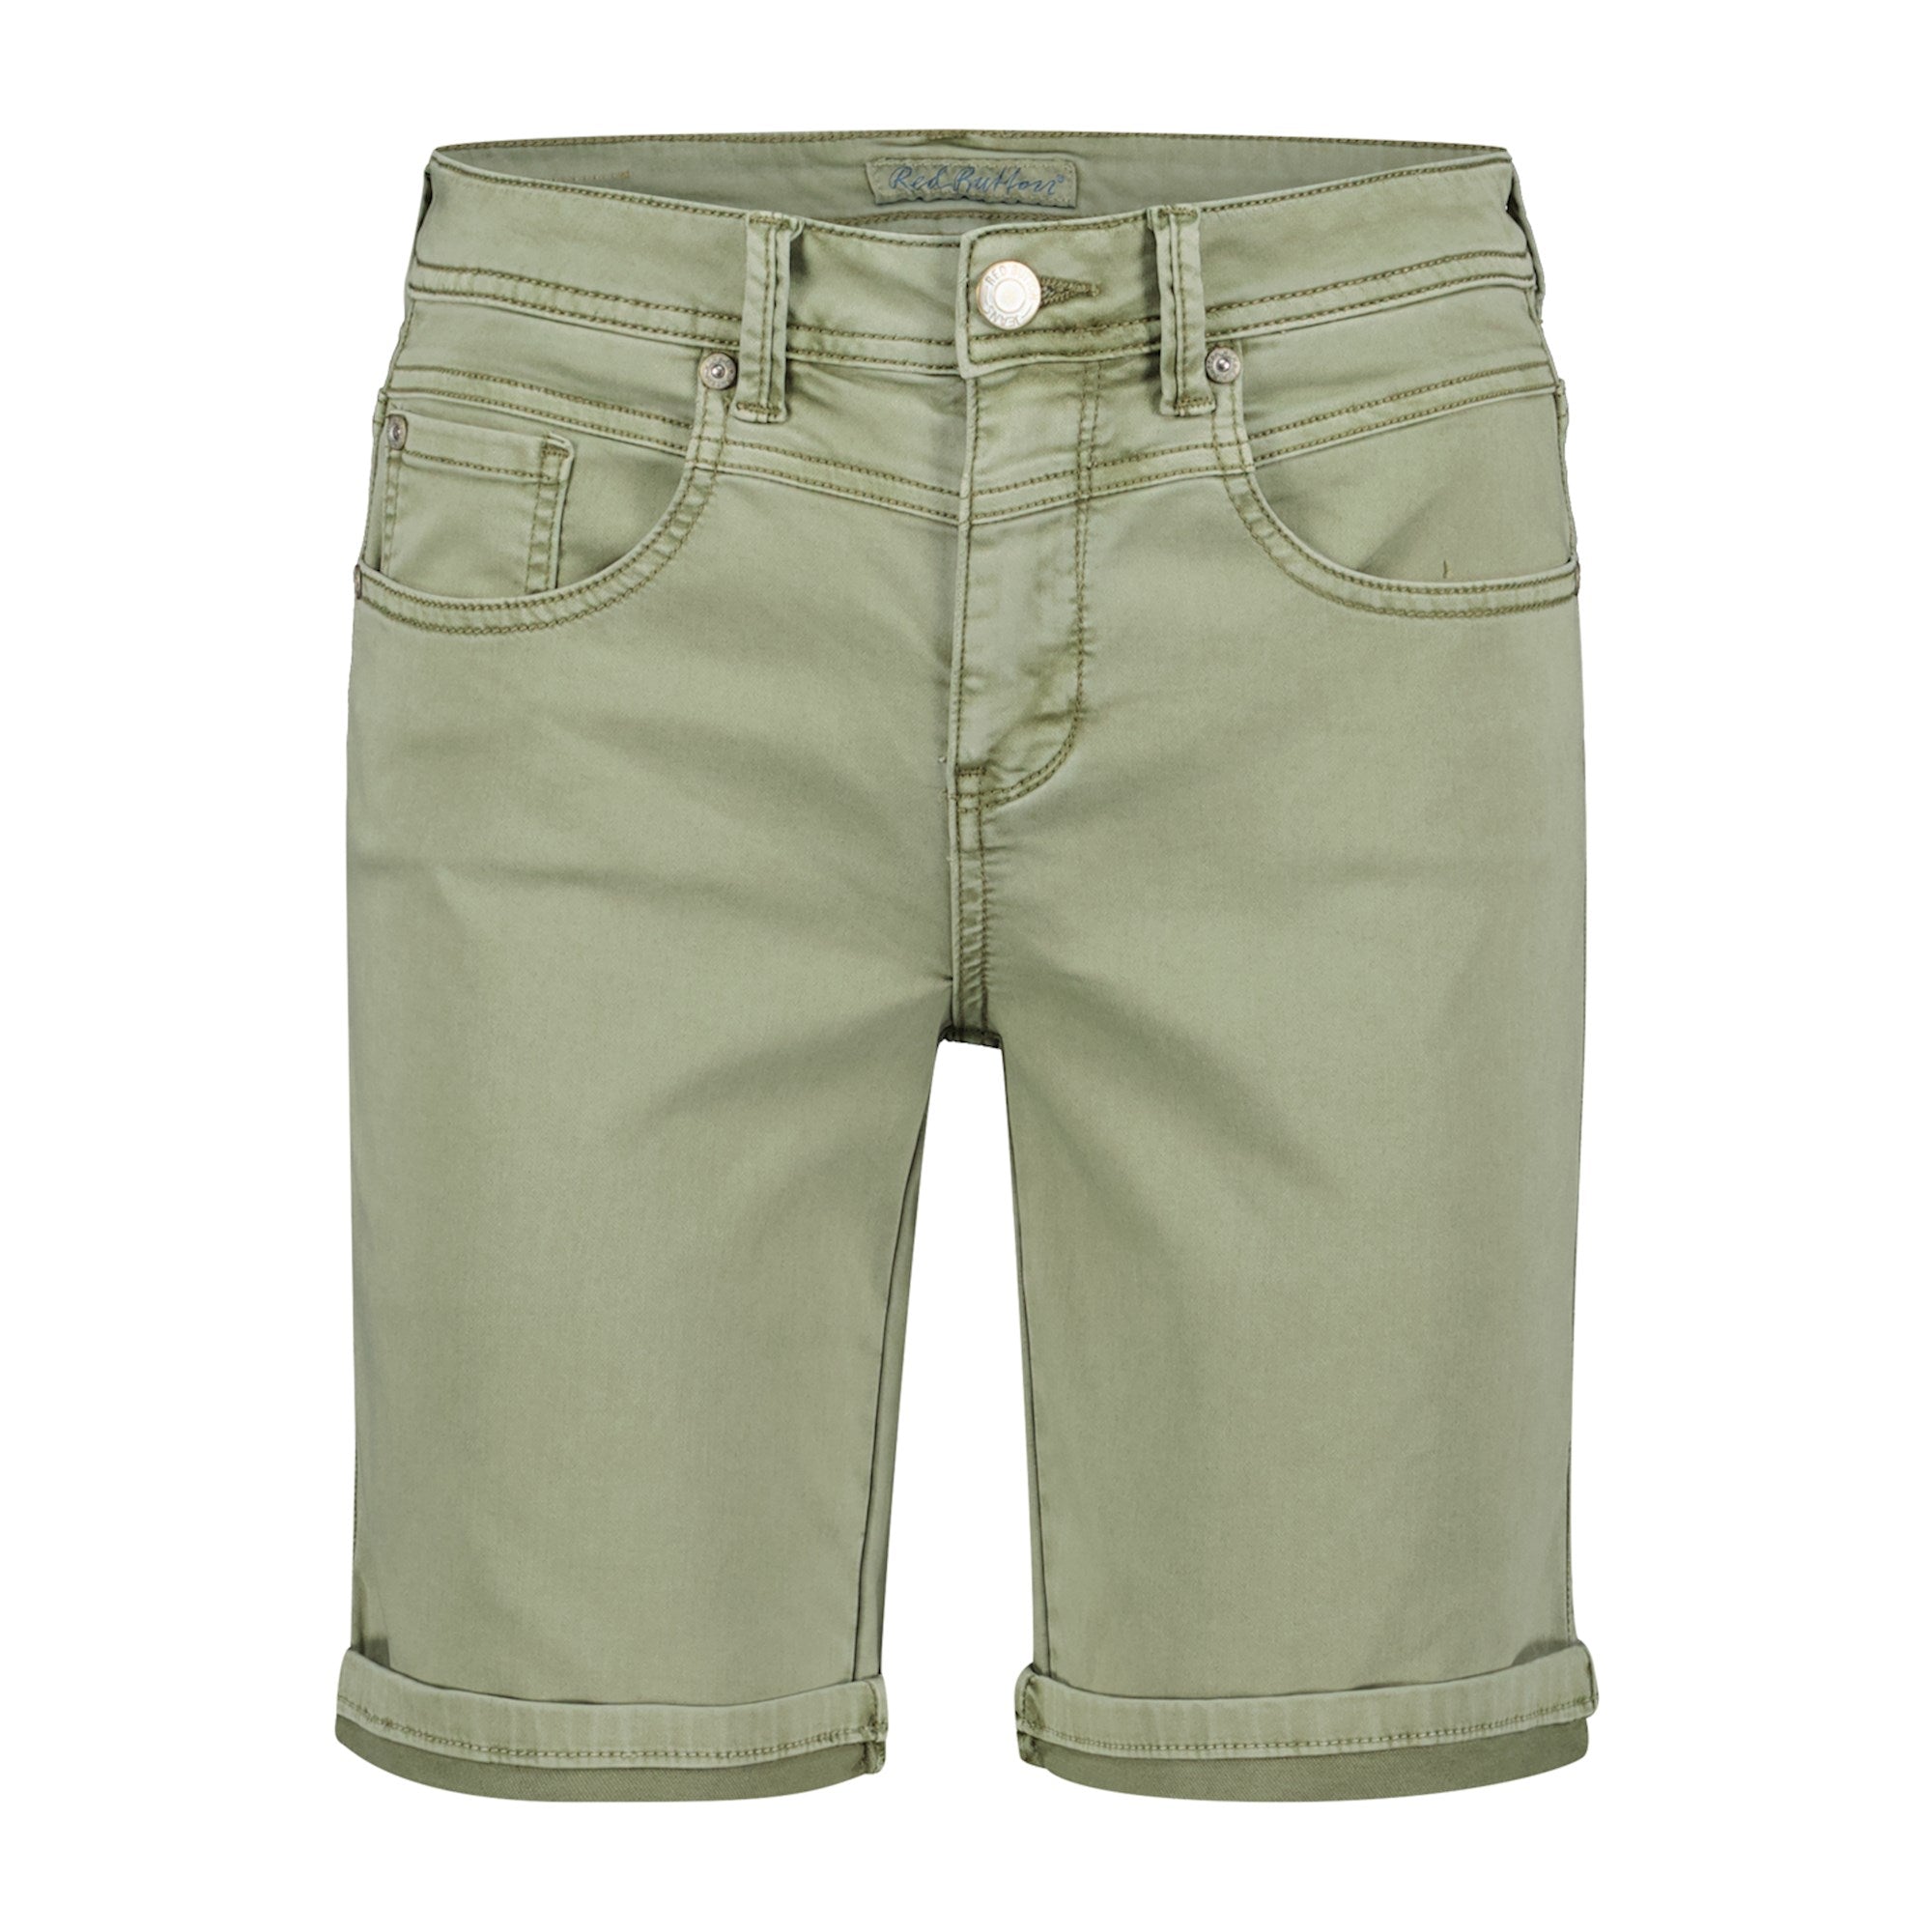 Relax Shorts in Teagreen